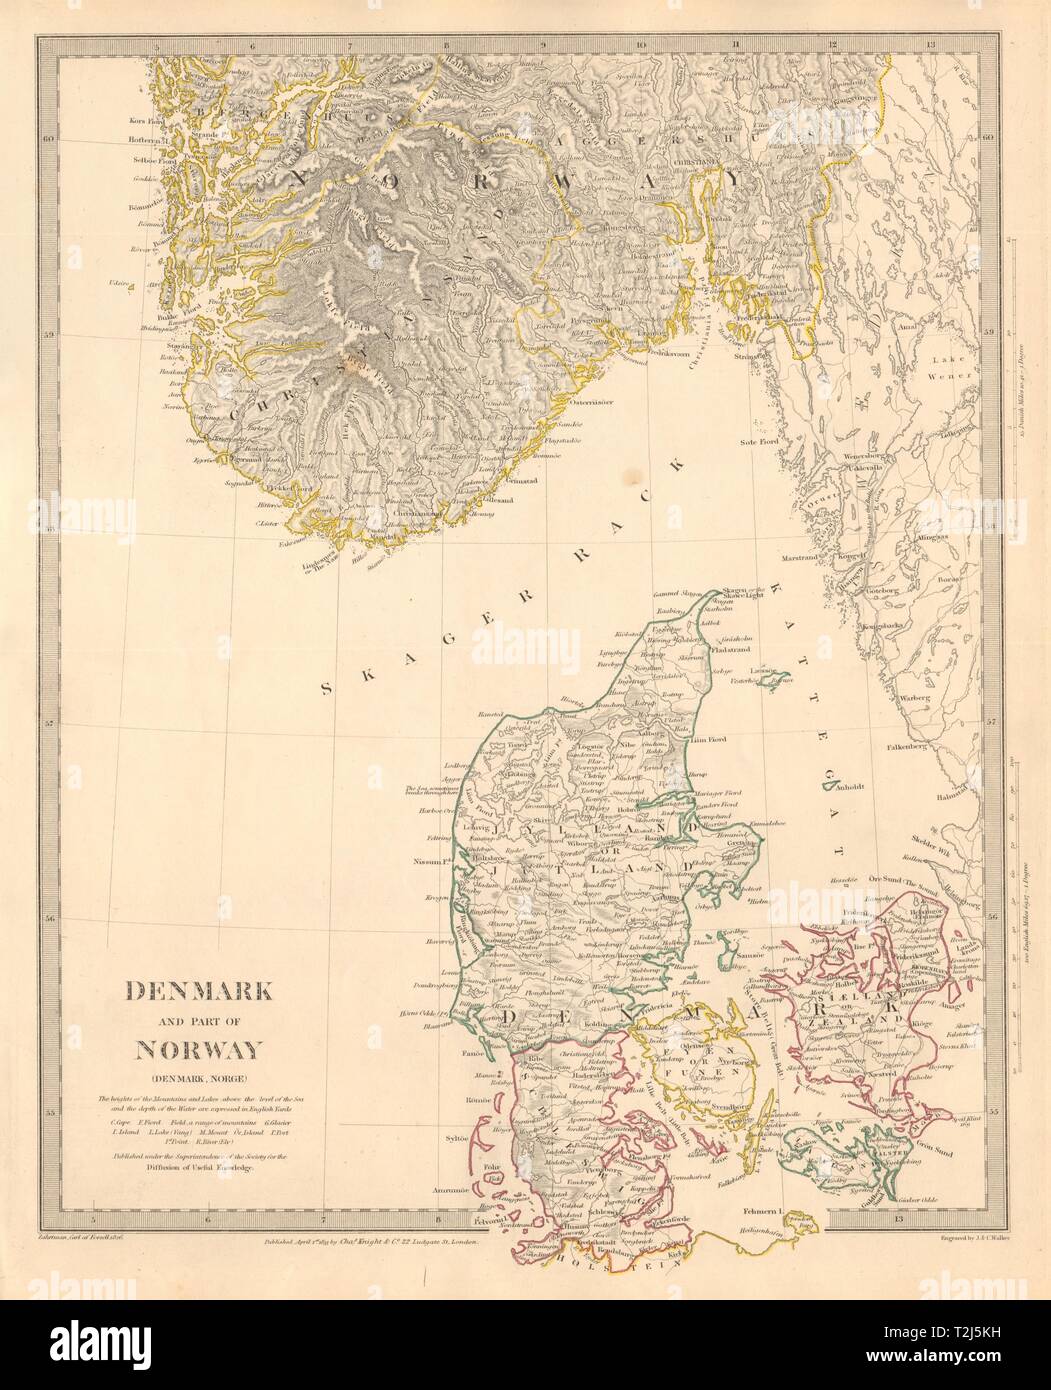 SCANDINAVIA. Denmark and Southern Norway (Norge) . SDUK 1845 old antique map Stock Photo